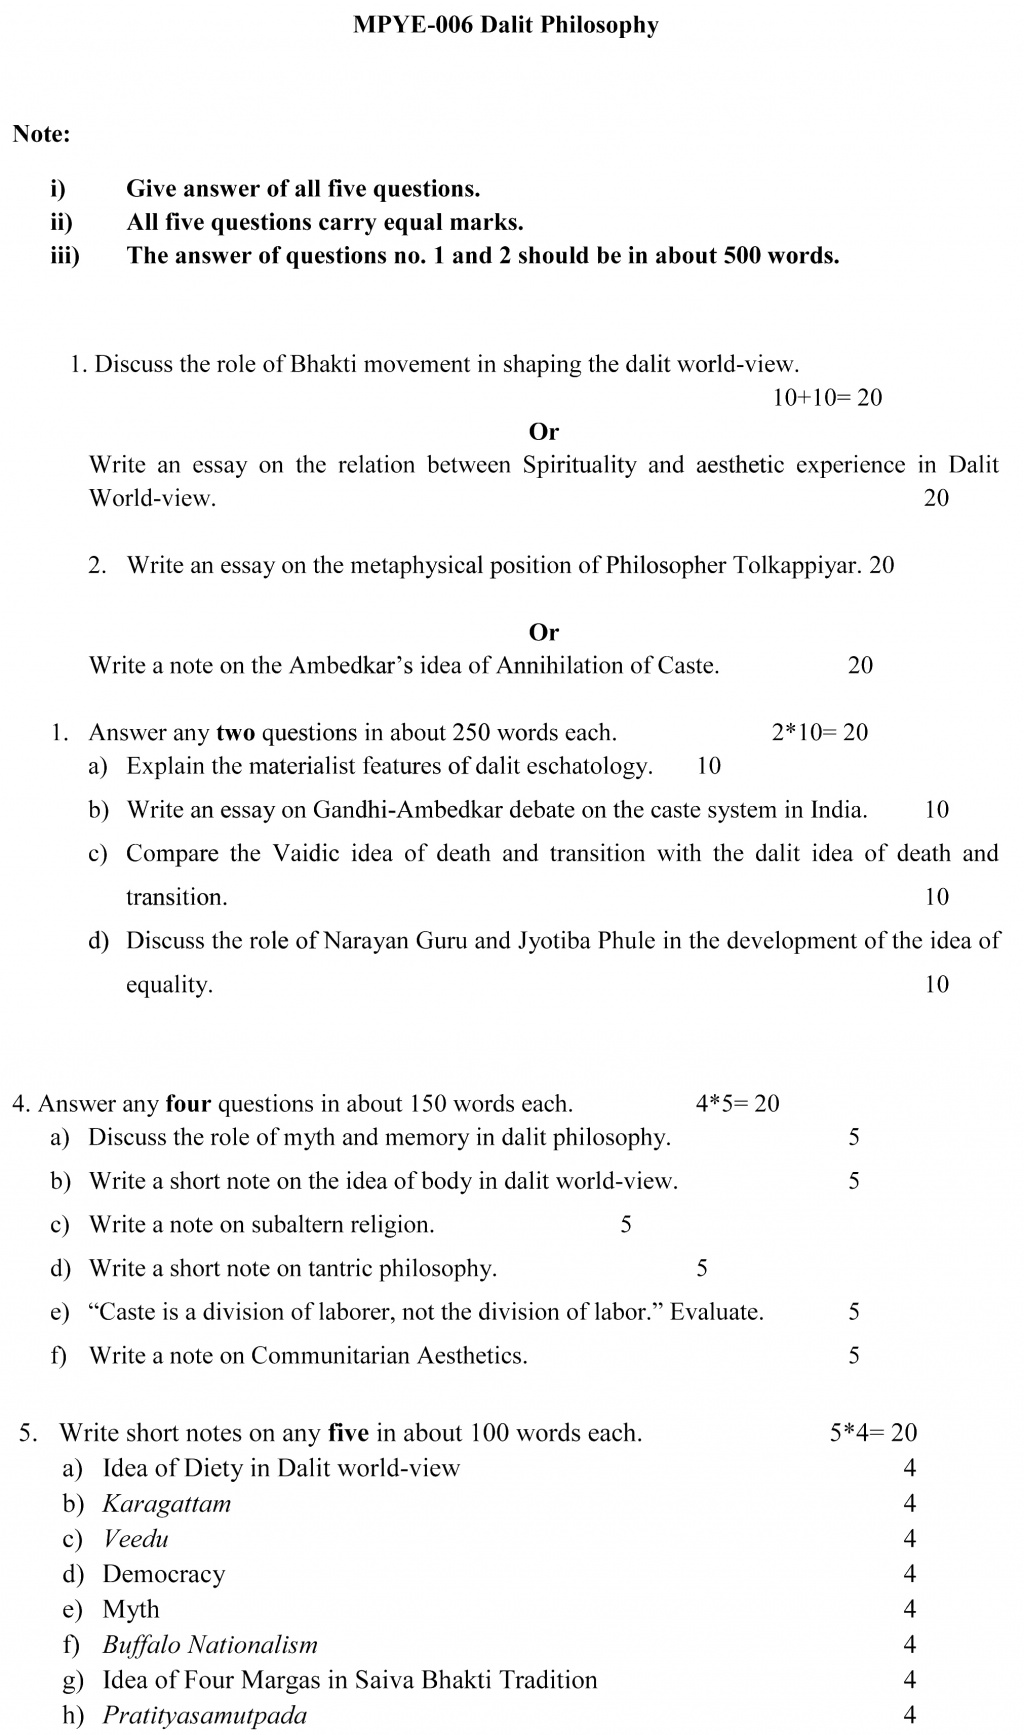 IGNOU MPYE-06 - Dalit Philosophy Latest Solved Assignment-December 2022 - June 2023